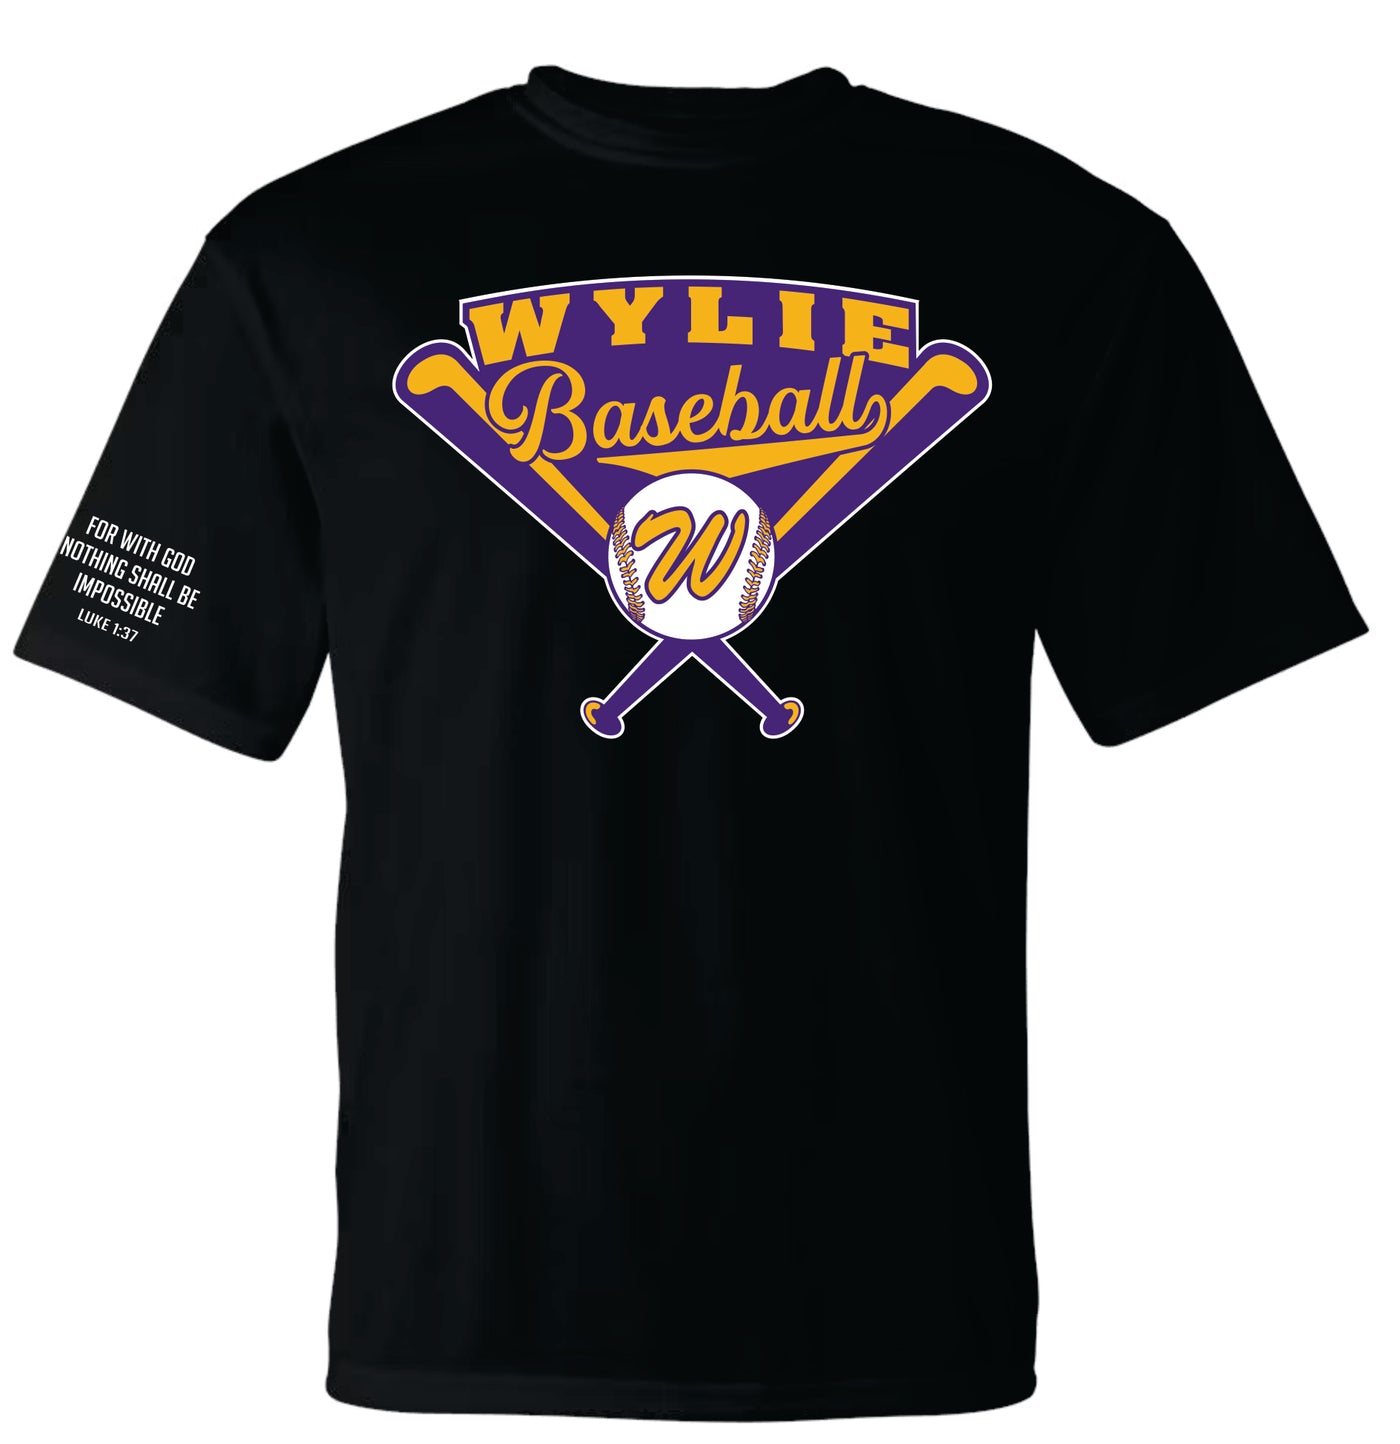 ***VARSITY Player Only - Wylie Baseball Tee